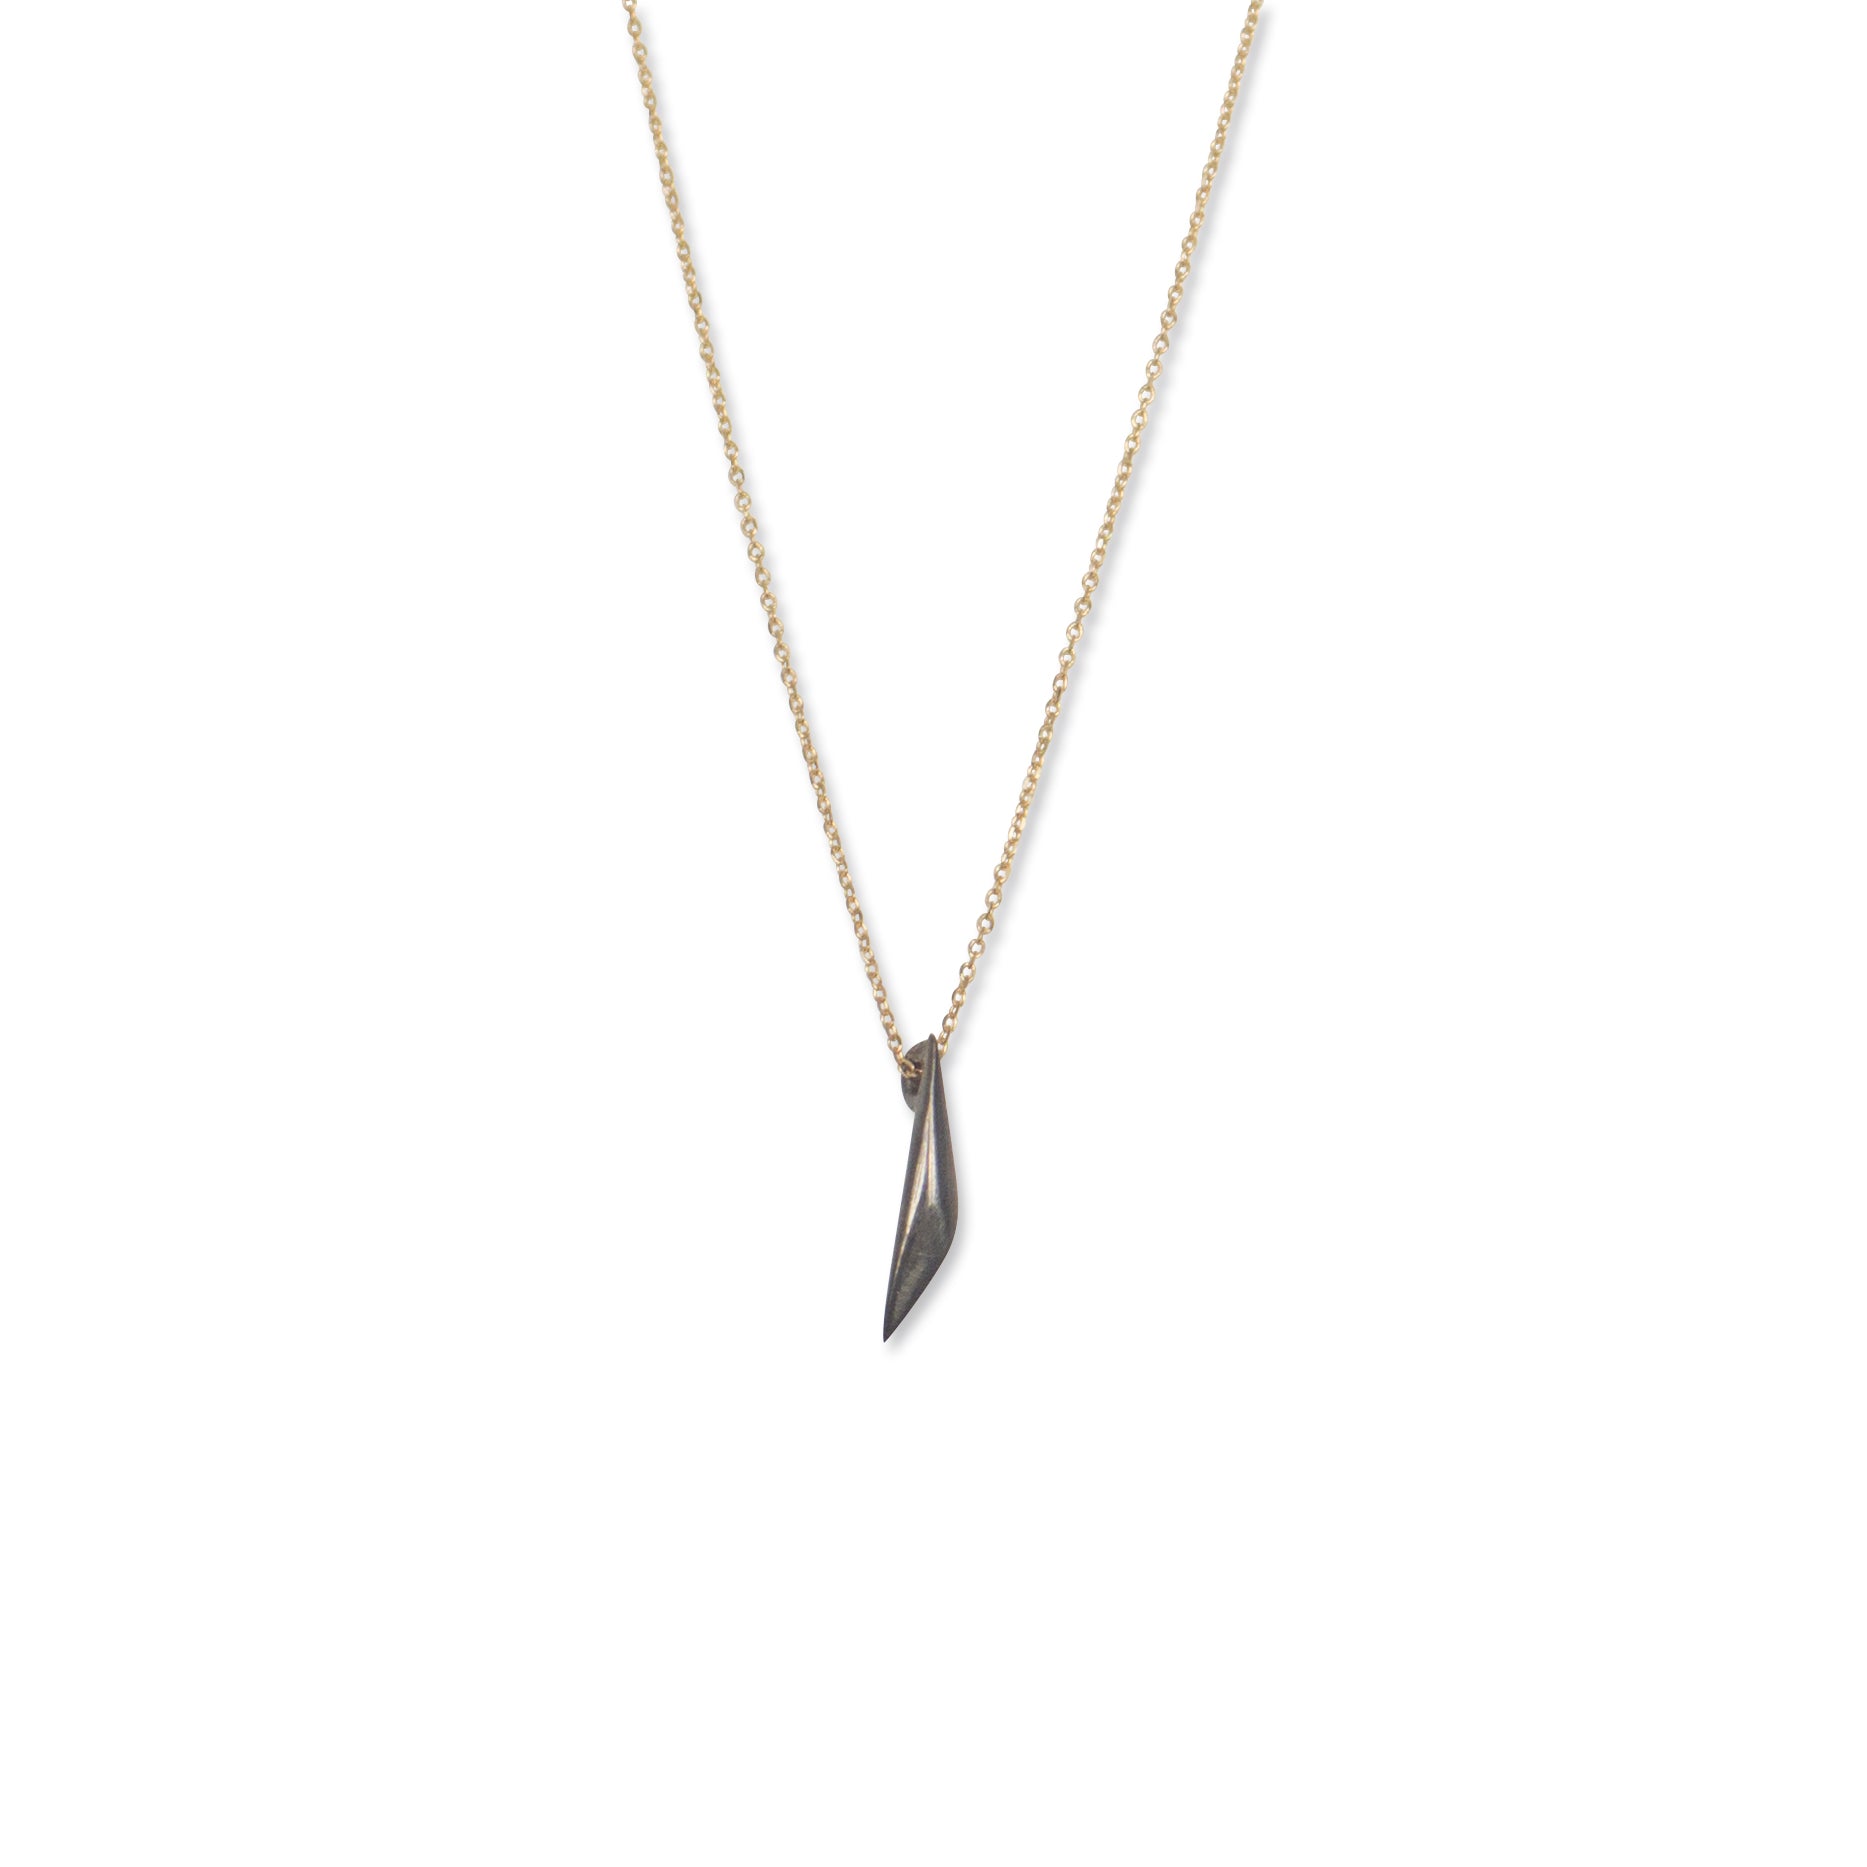 sterling silver plated in black rhodium/14k yellow gold chain vertical shard necklace